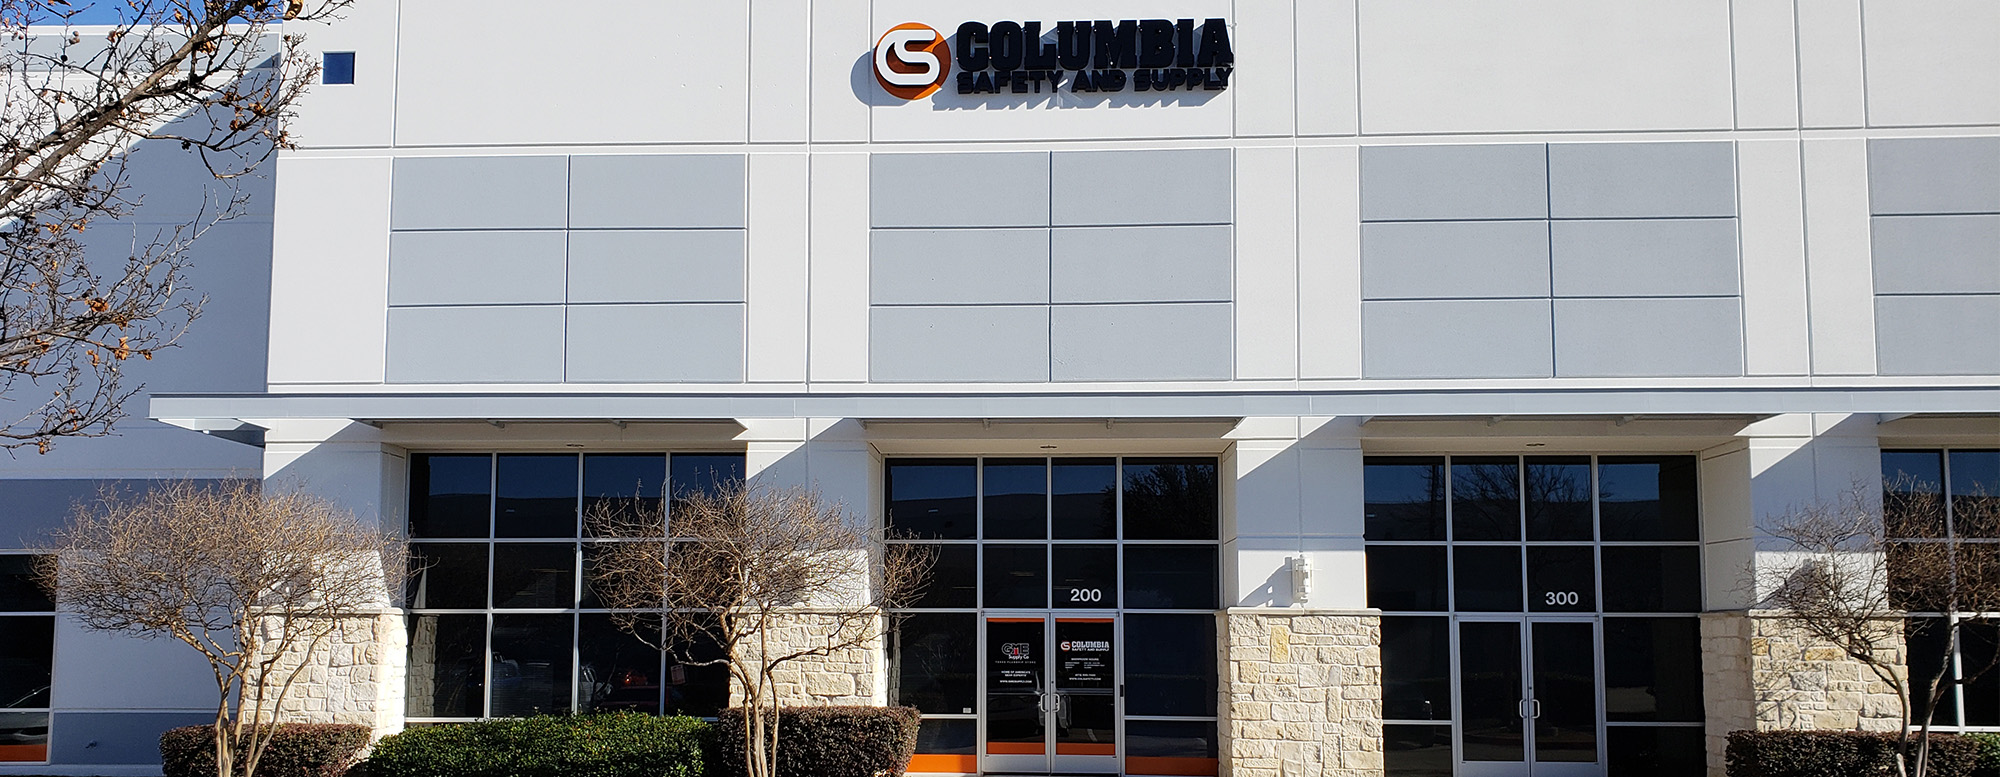 Columbia Safety and Supply's Storefront & Distribution Center located in Coppell (Dallas), TX